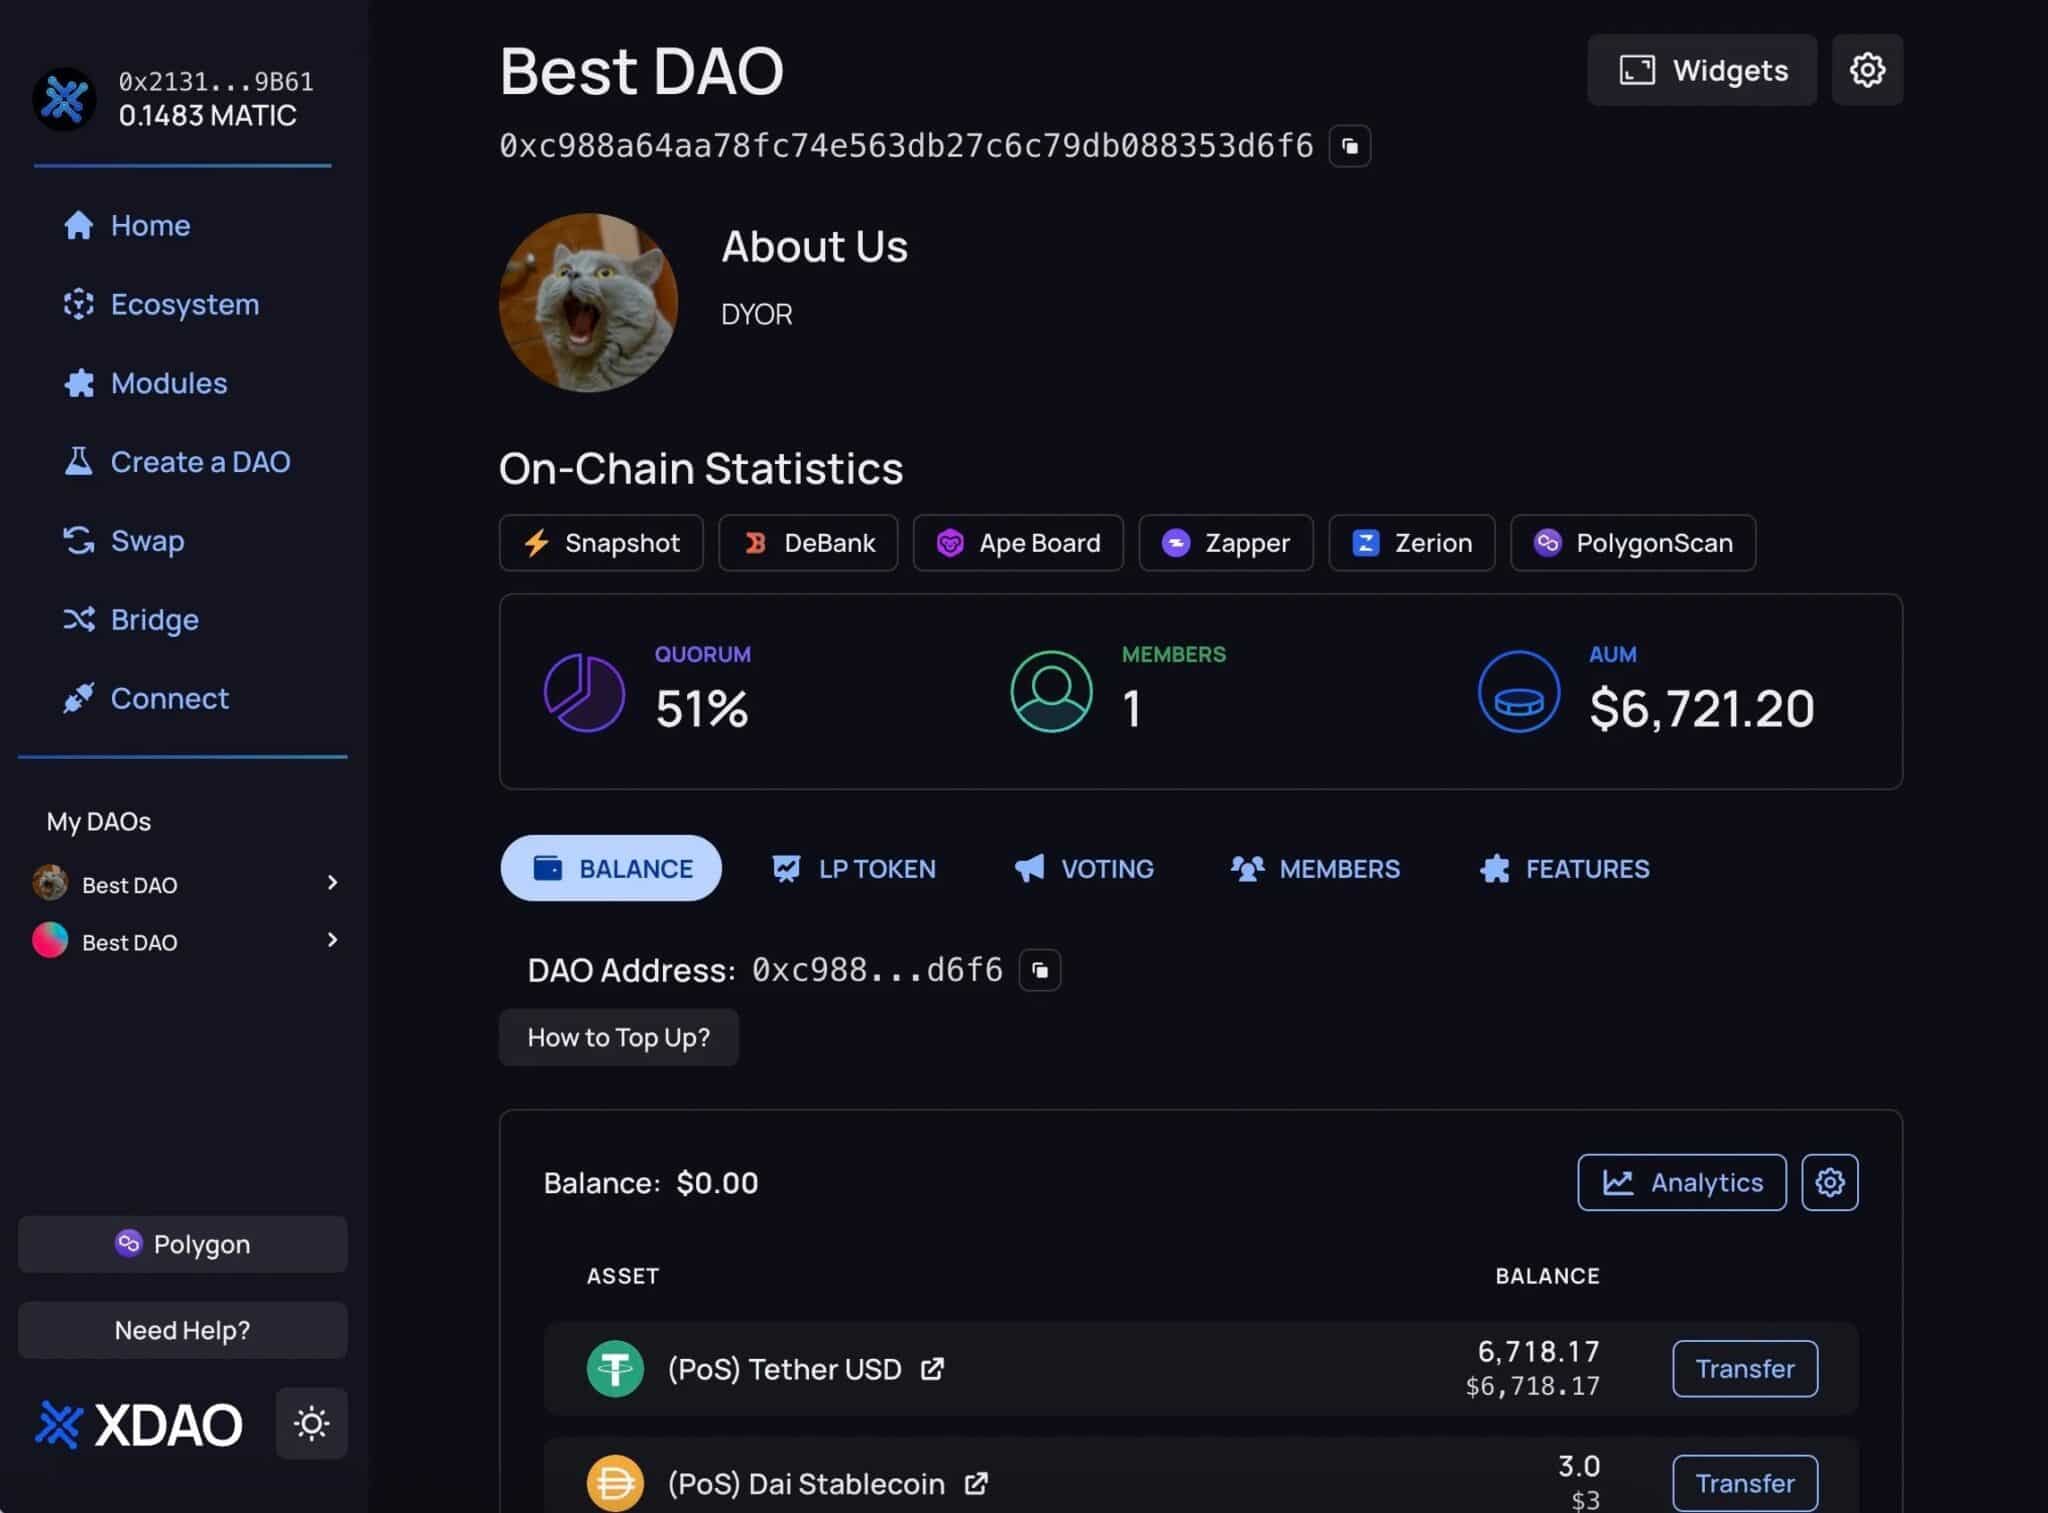 XDAO dashboard overview